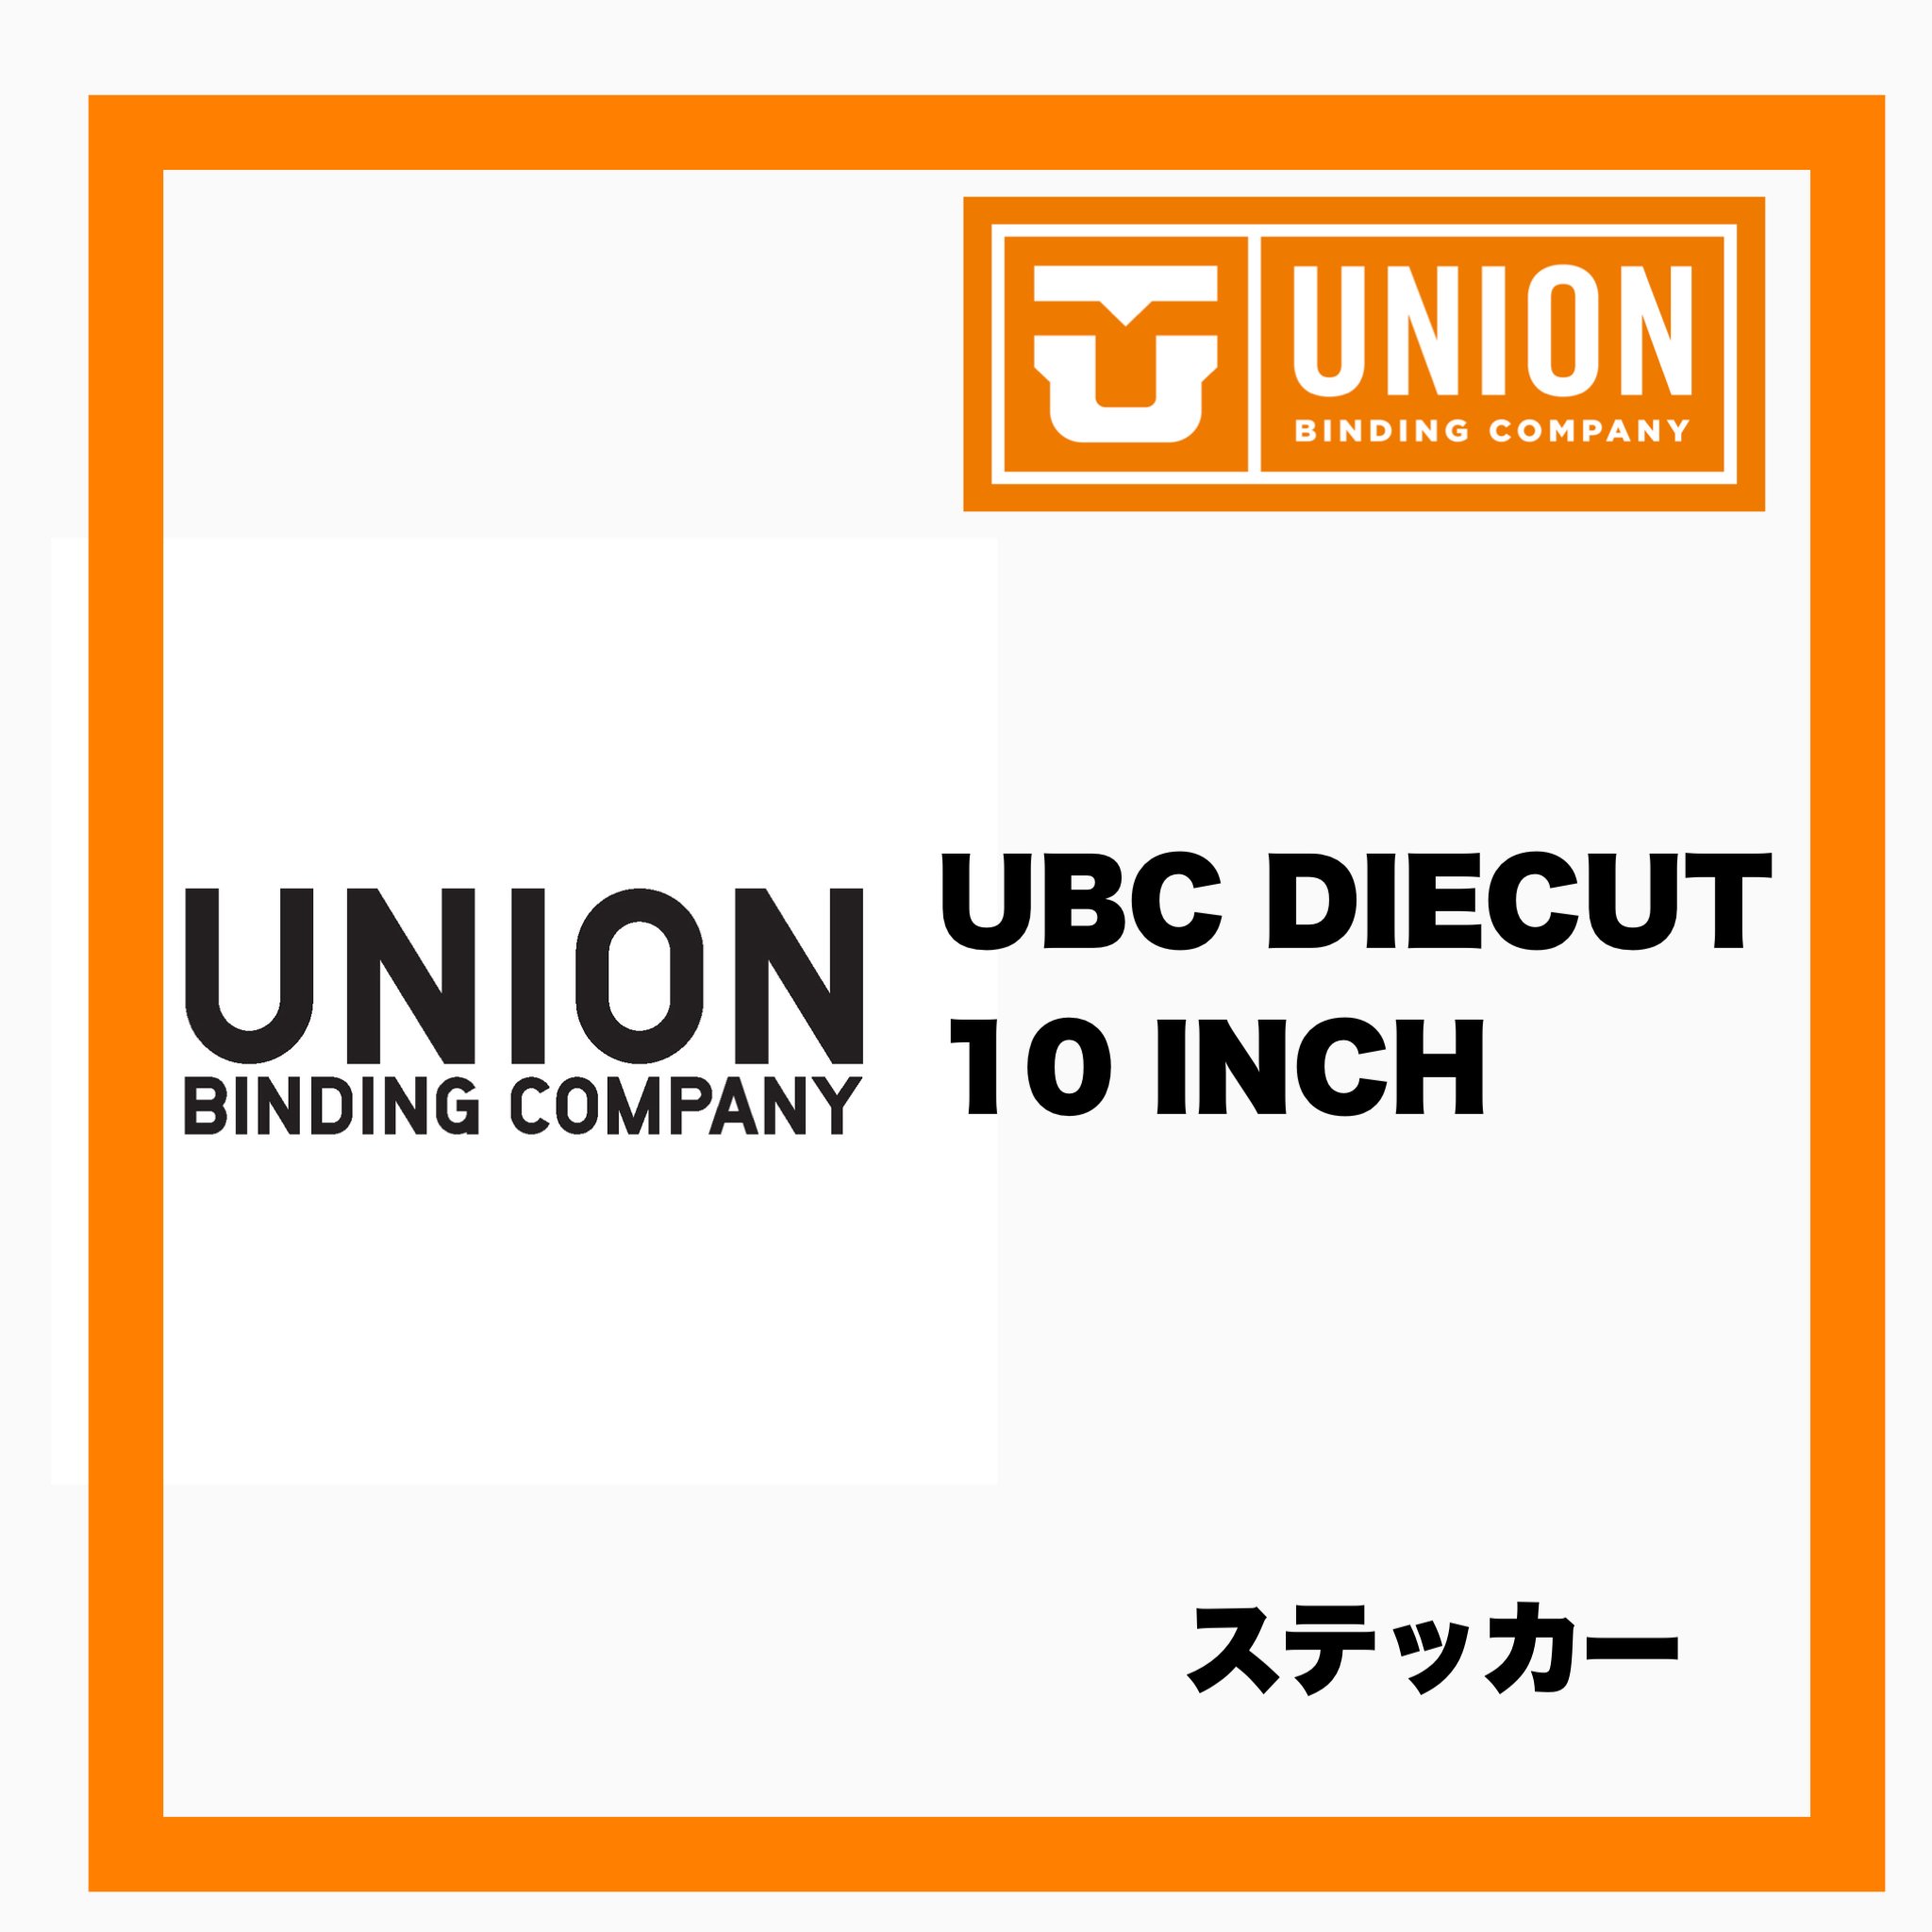 STICKER【UNIONステッカー】 - JOINT HOUSE